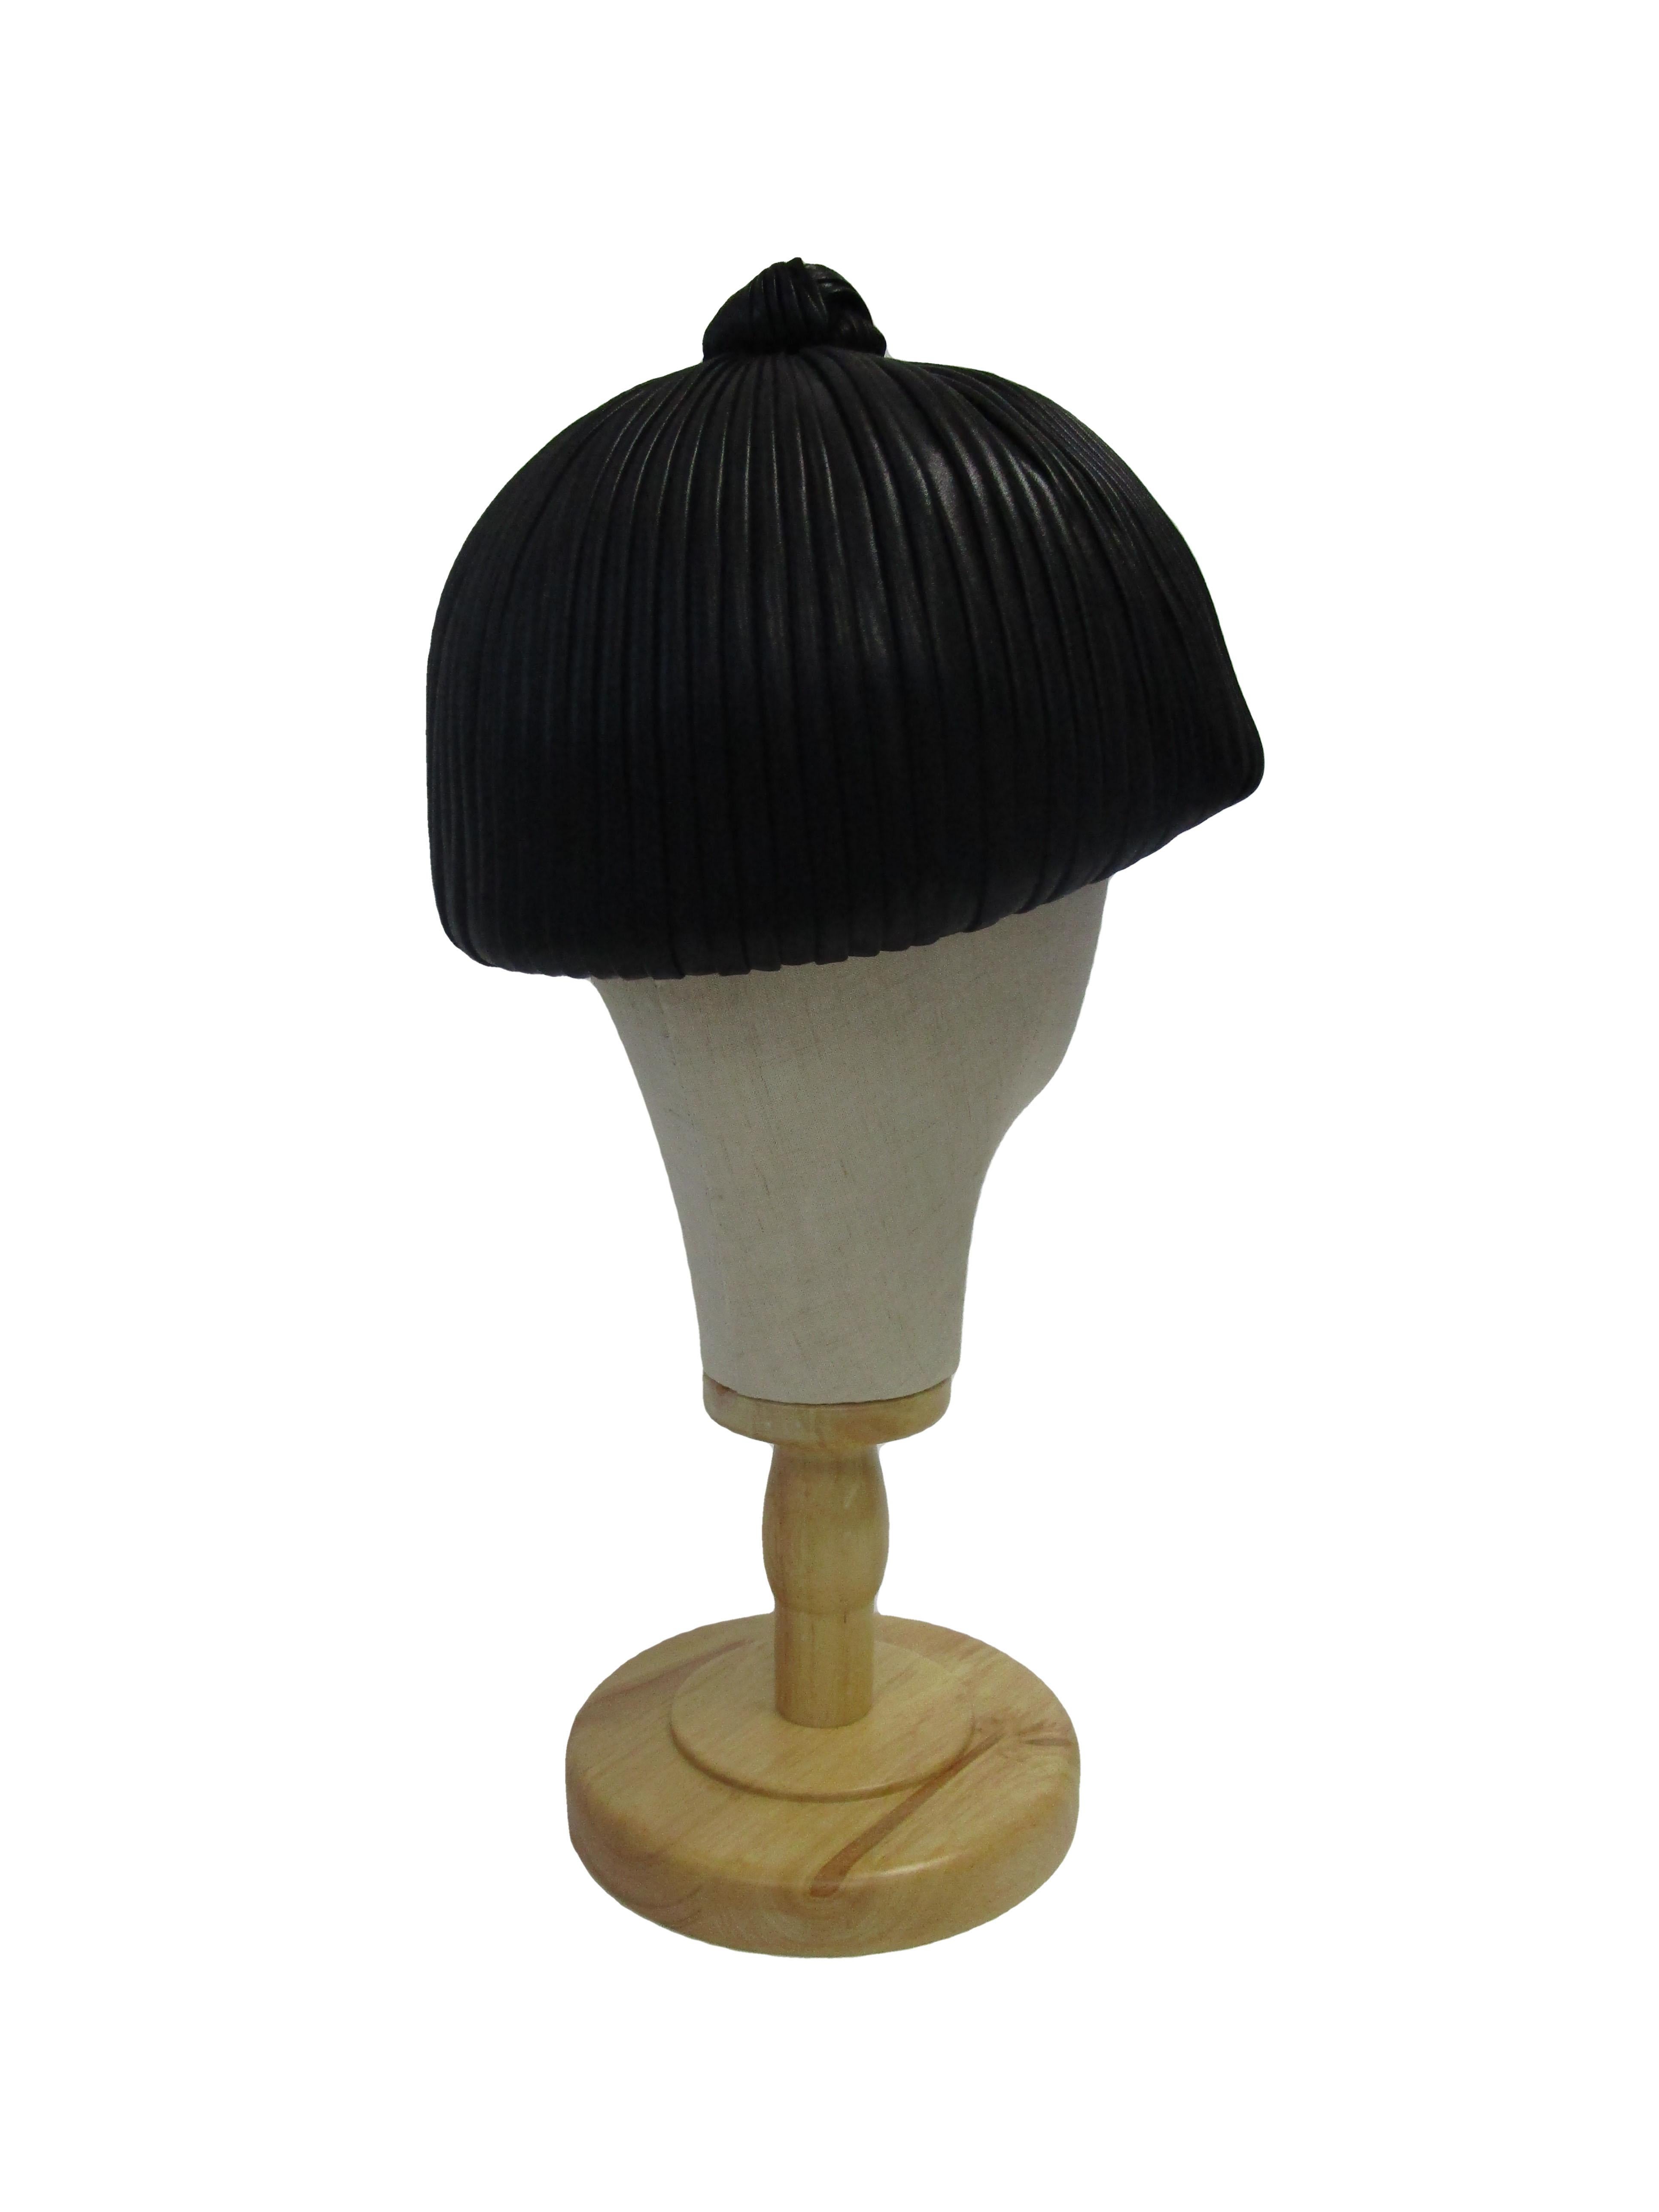 Rare 1960s Christian Dior Black Leathery Silk Chapeaux In Excellent Condition For Sale In Houston, TX